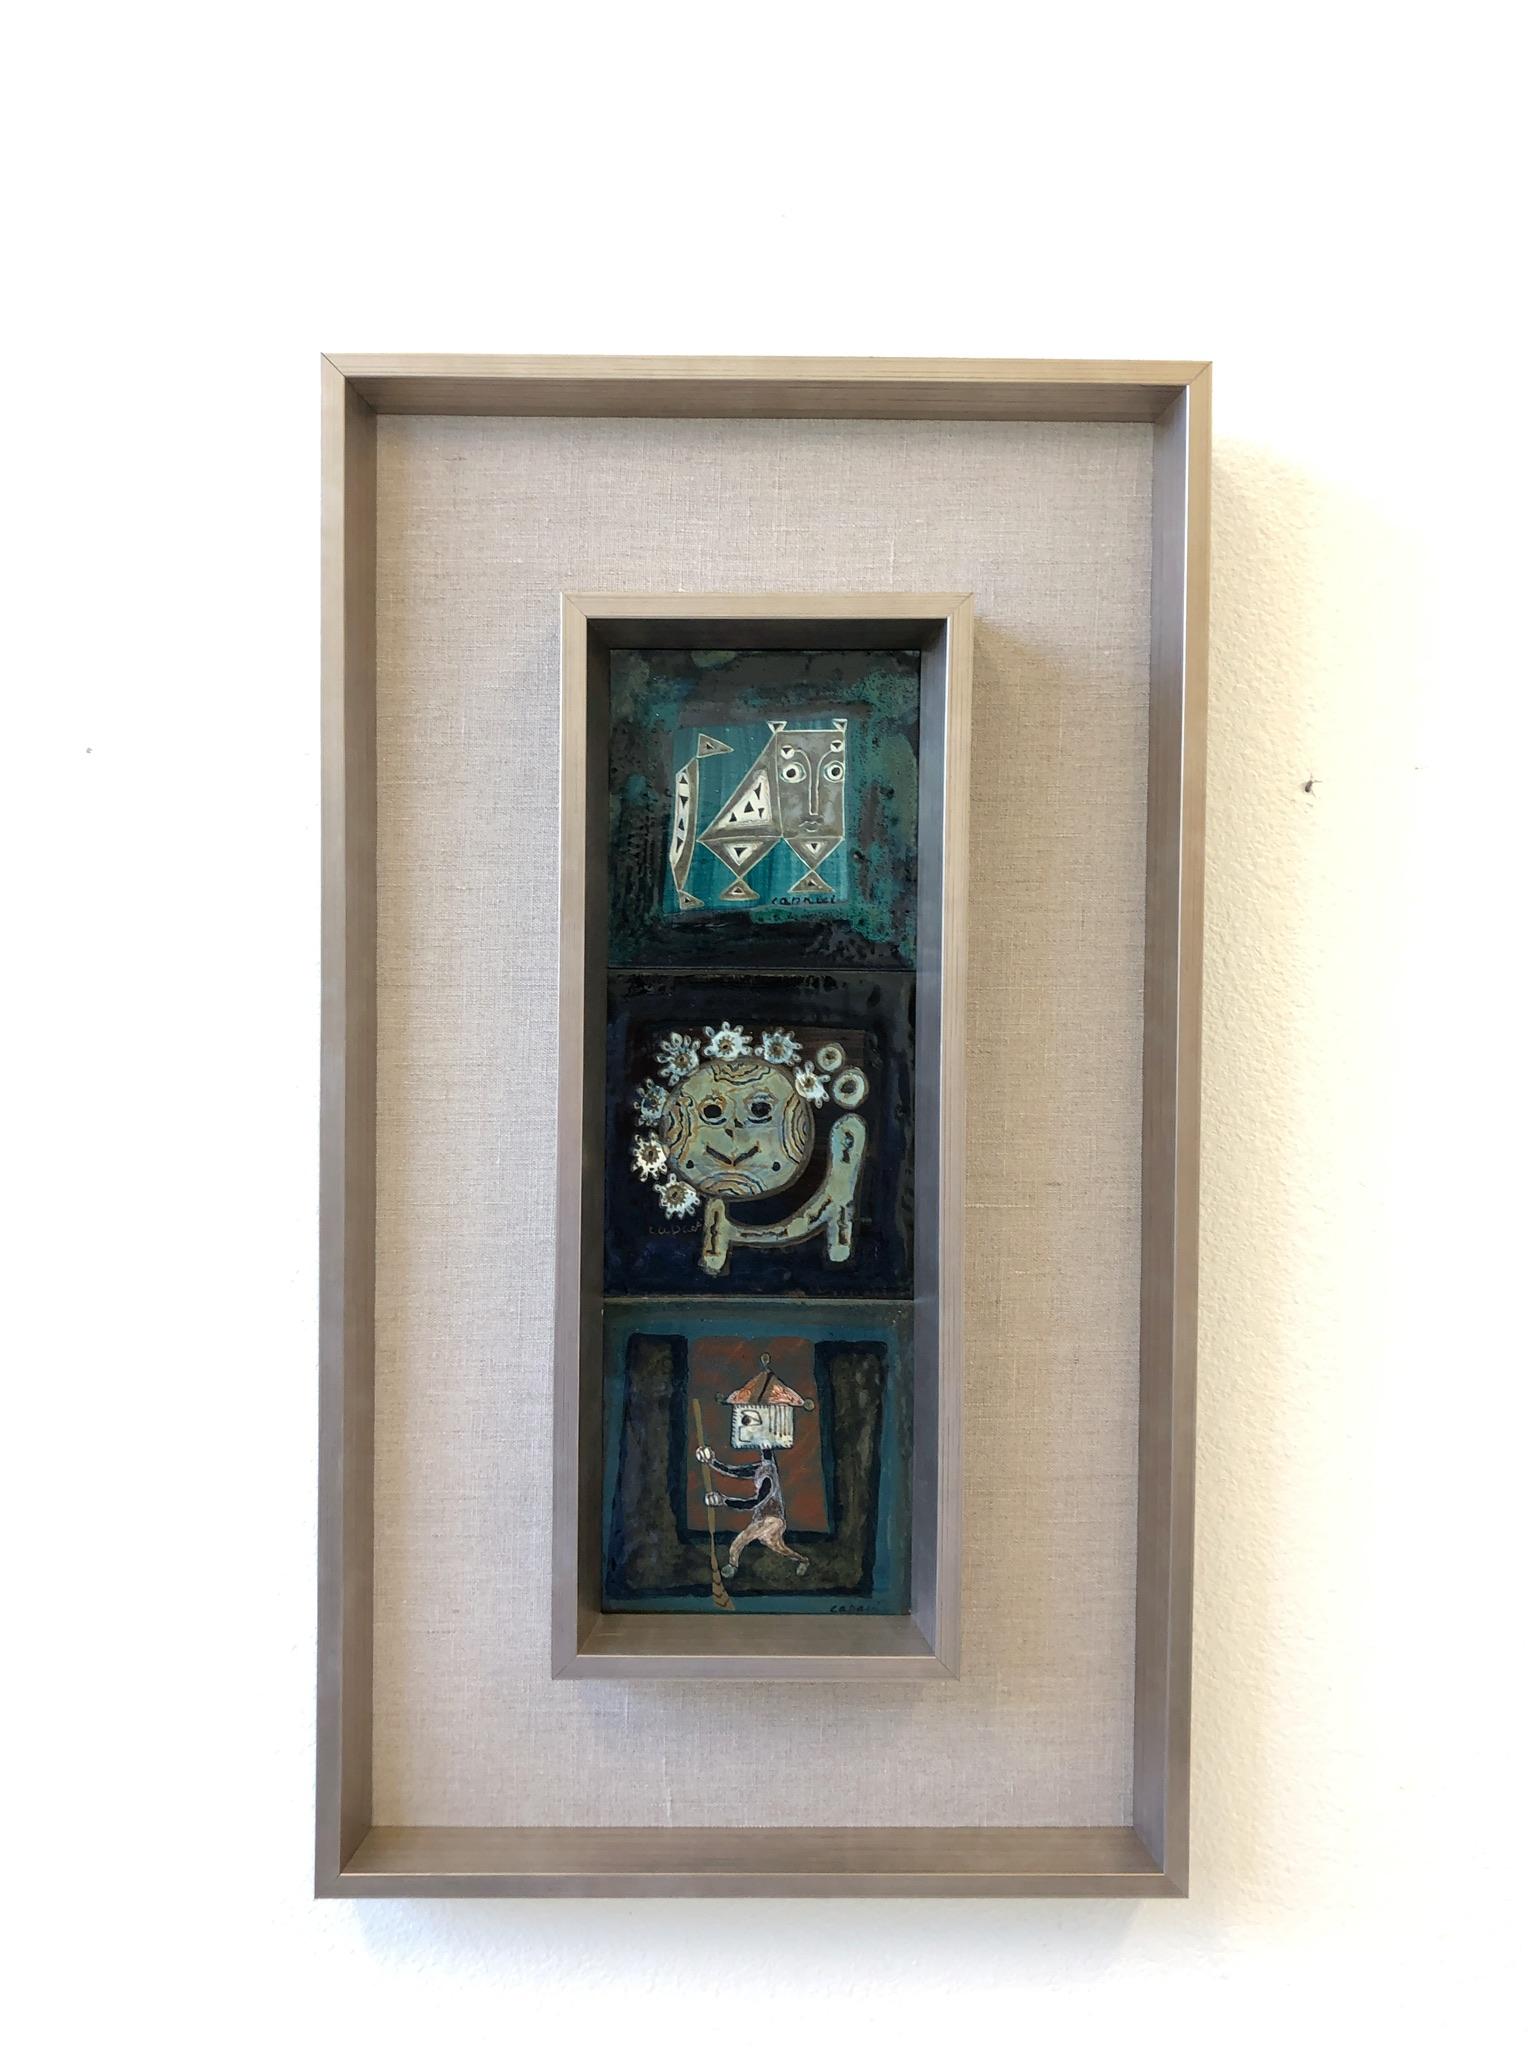 A pair of Italian studio ceramics hand-painted and glazed tiles by Bruno Capacci.
Set of three tiles in each frame. Newly reframe as originally frames. The frames are wood lacquere silver. Each tile is sign Capacci.

Measures: 27.5” high x 15.75”